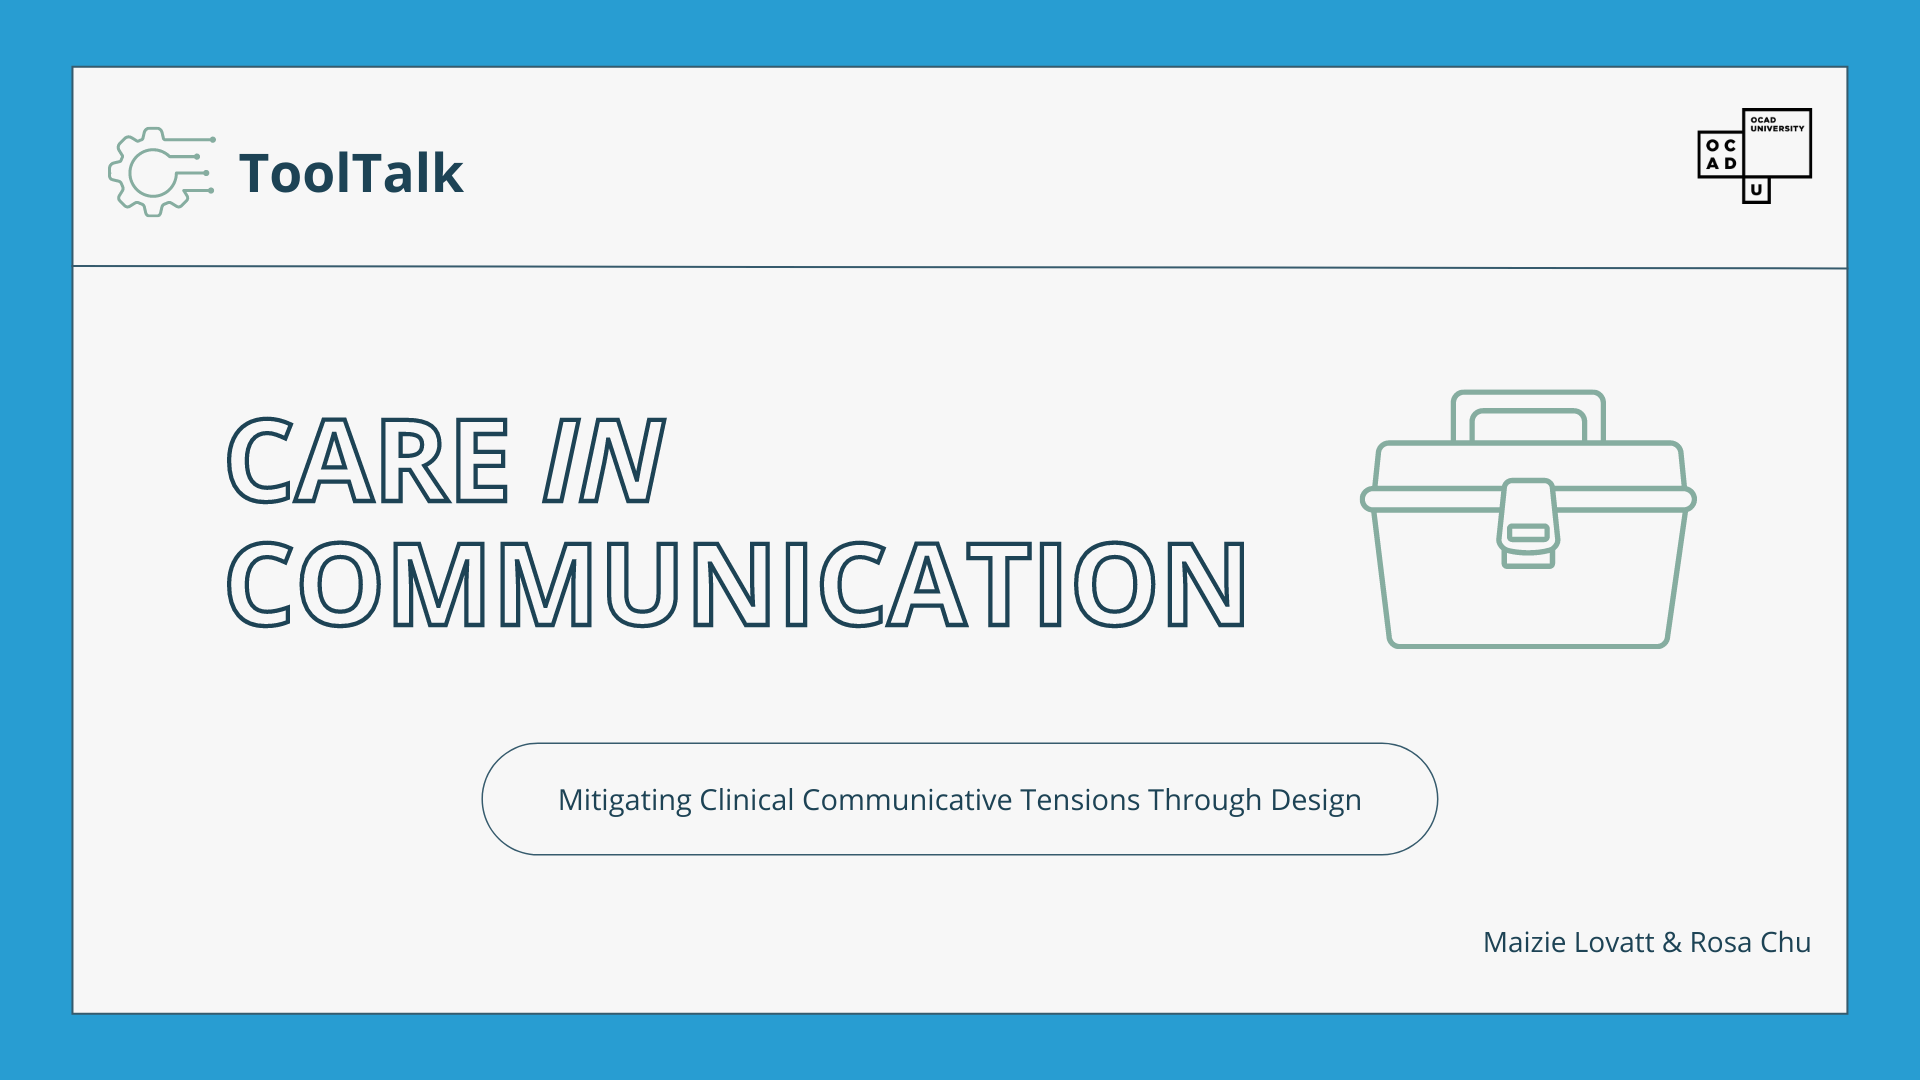 Care In Communication: Mitigating Clinical Communicative Tensions Through Design